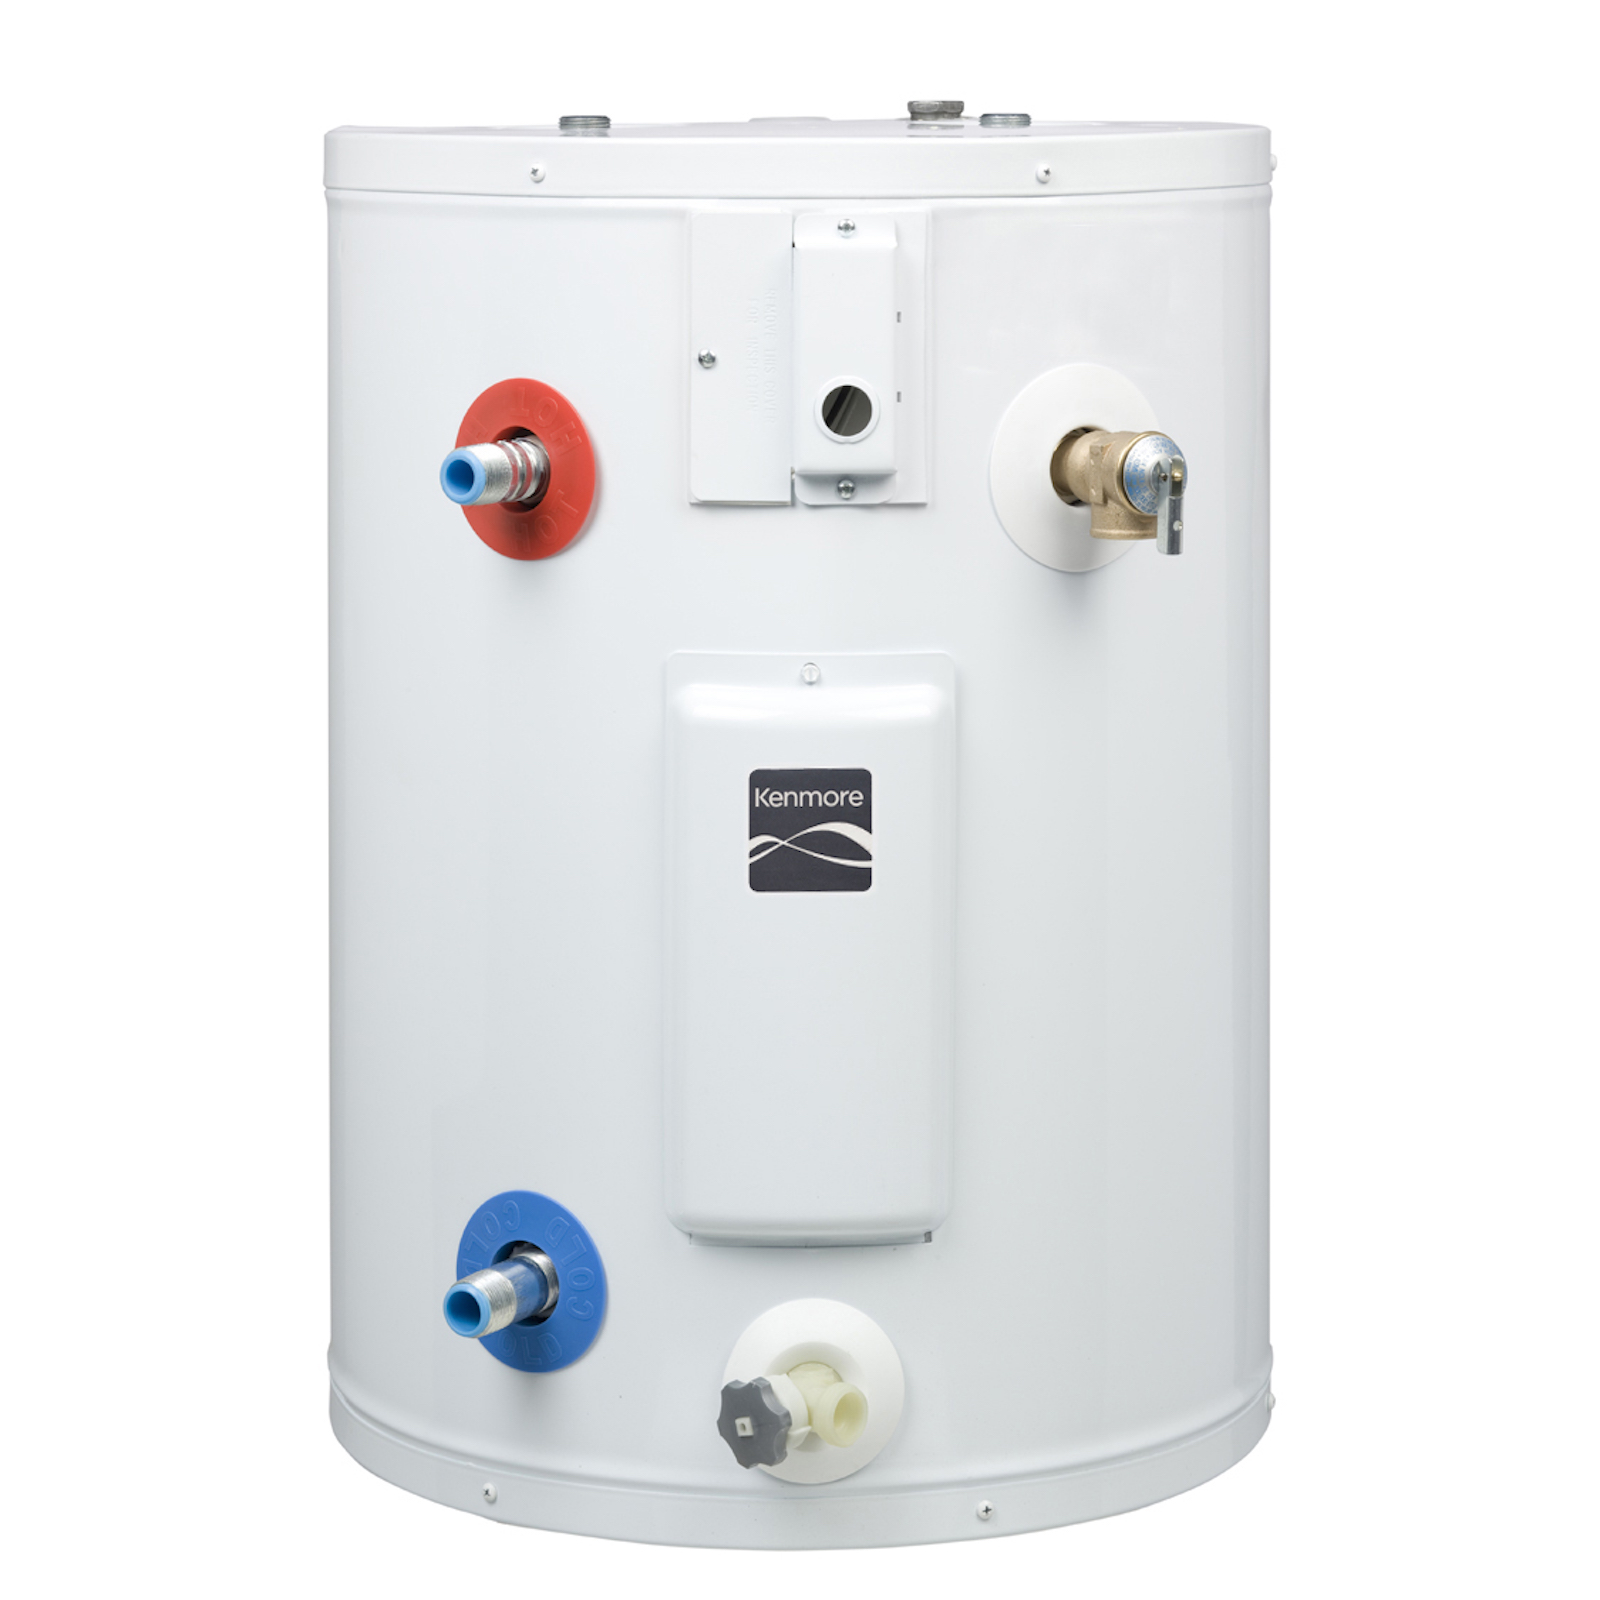 kenmore-58630-28-gal-6-year-compact-electric-water-heater